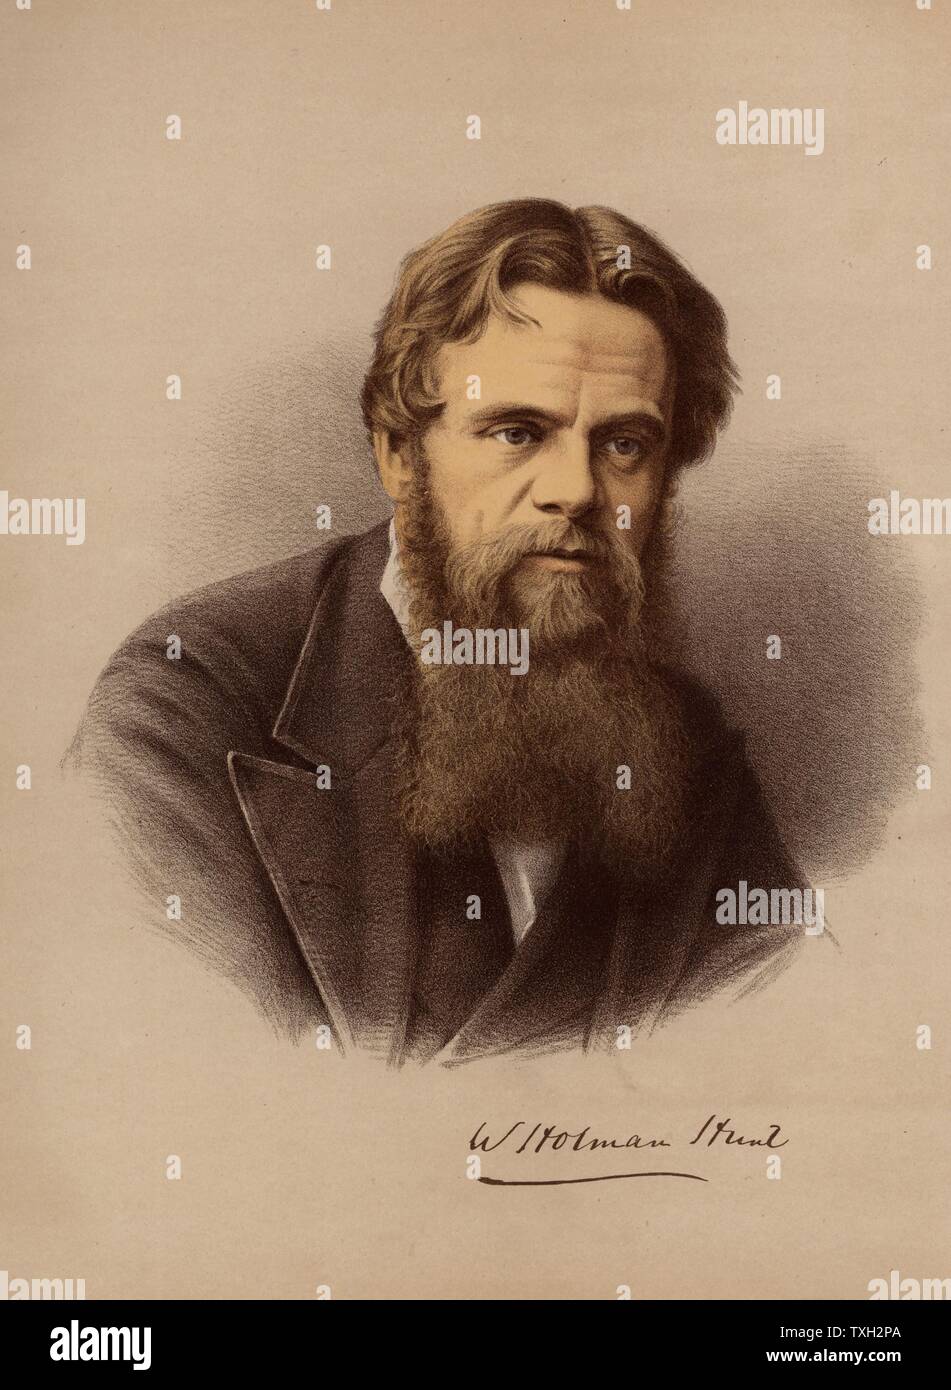 William Holman Hunt (1827-1910) British painter and one of the founders of the Pre-Raphaelite Brotherhood (1848). Appointed to the Order of Merit (1905). From 'The Modern Portrait Gallery' (London, c1880). Tinted lithograph. Stock Photo